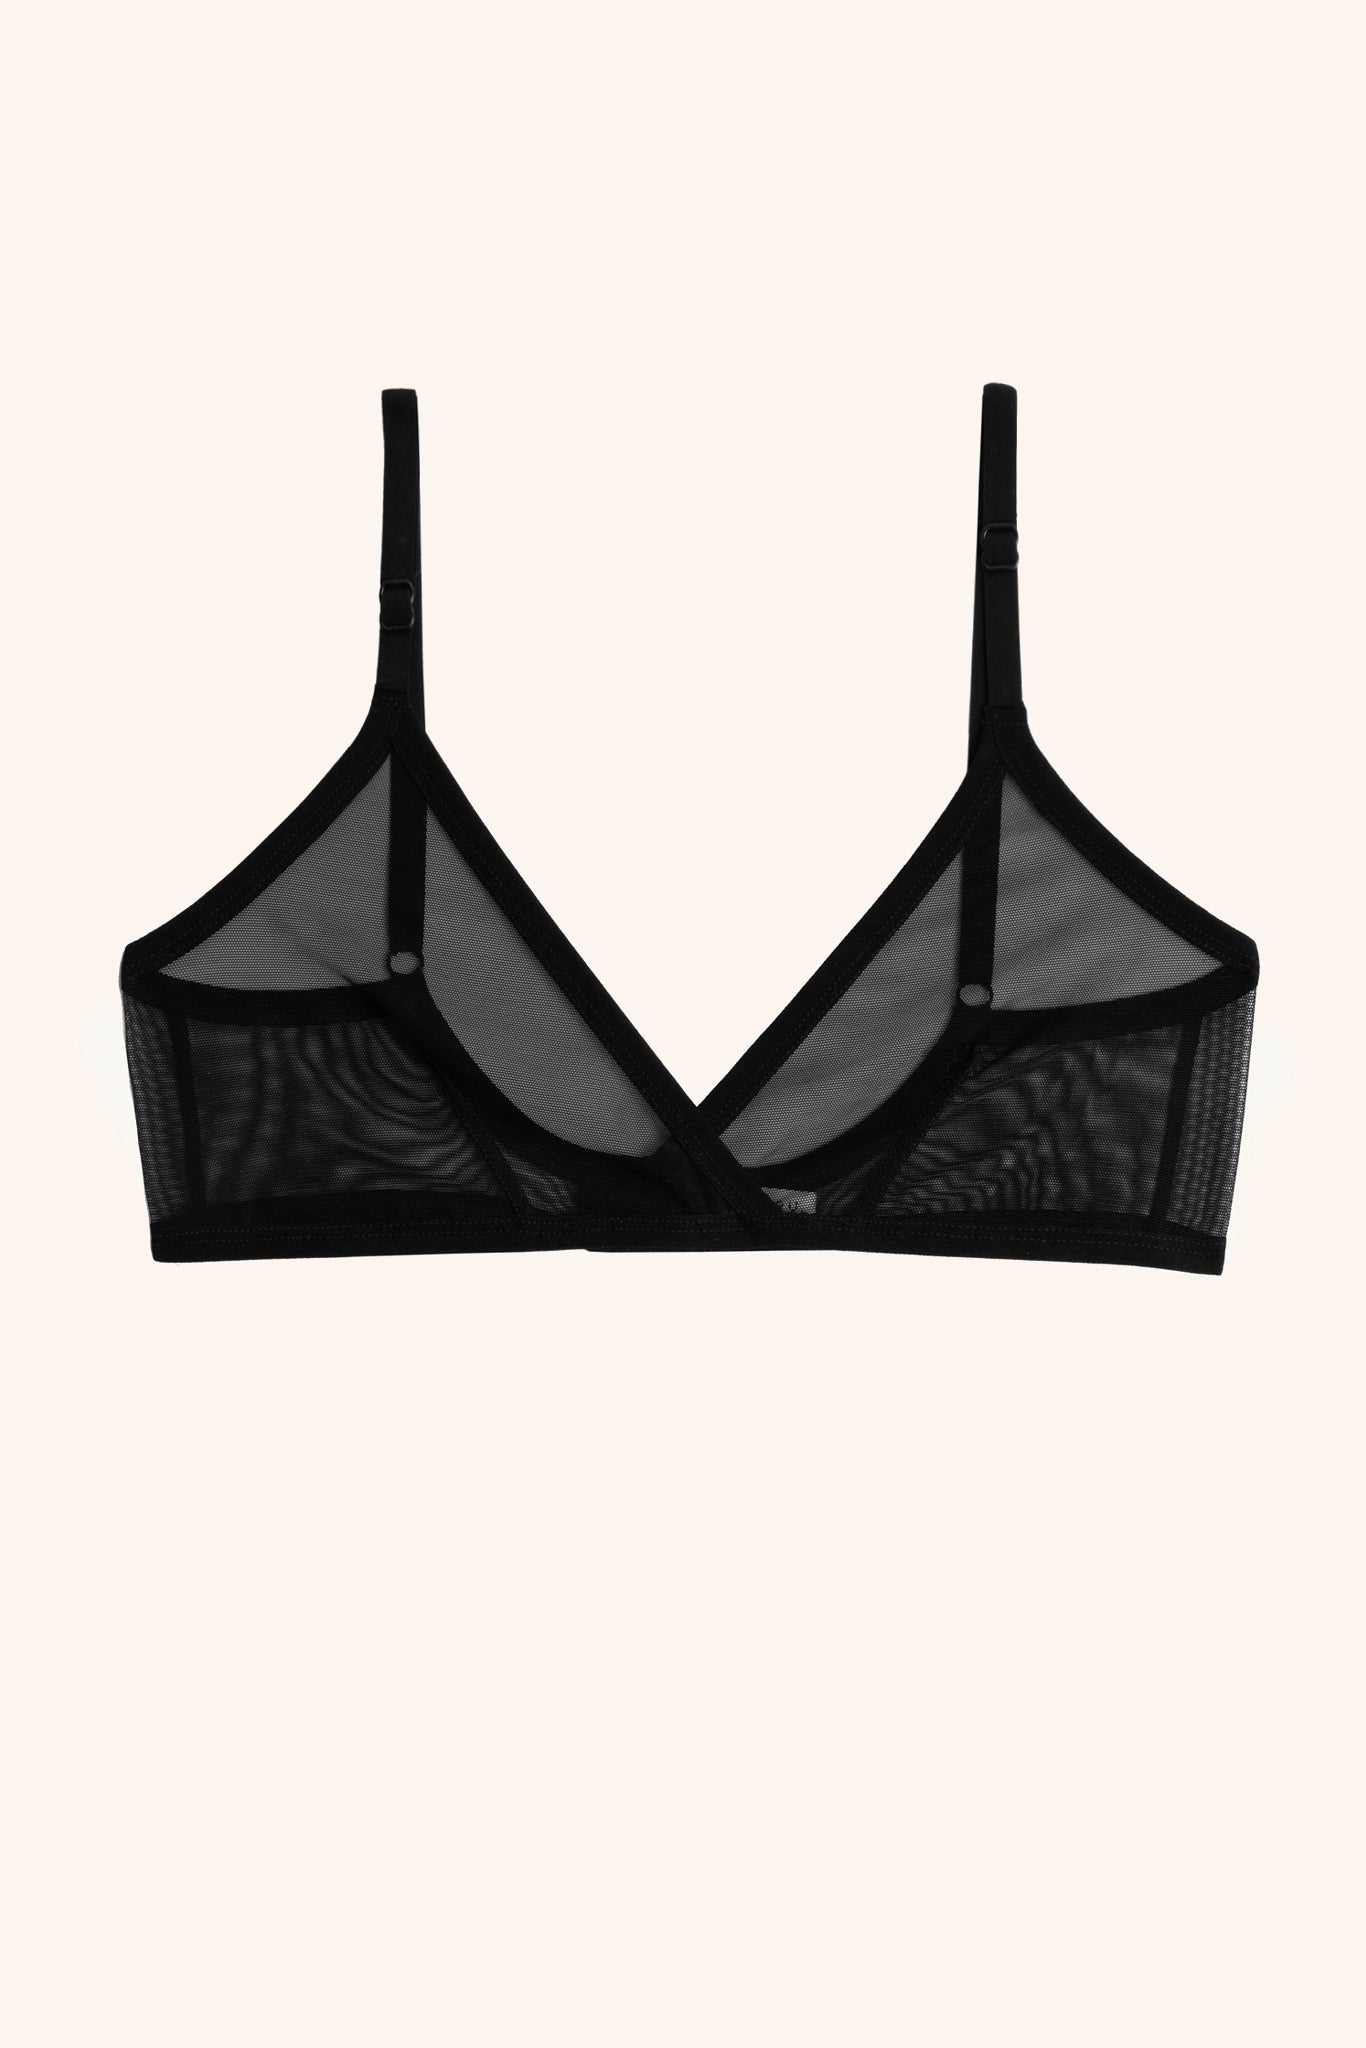 Out From Under Iszora Satin & Lace Triangle Bralette  Urban Outfitters  Singapore - Clothing, Music, Home & Accessories